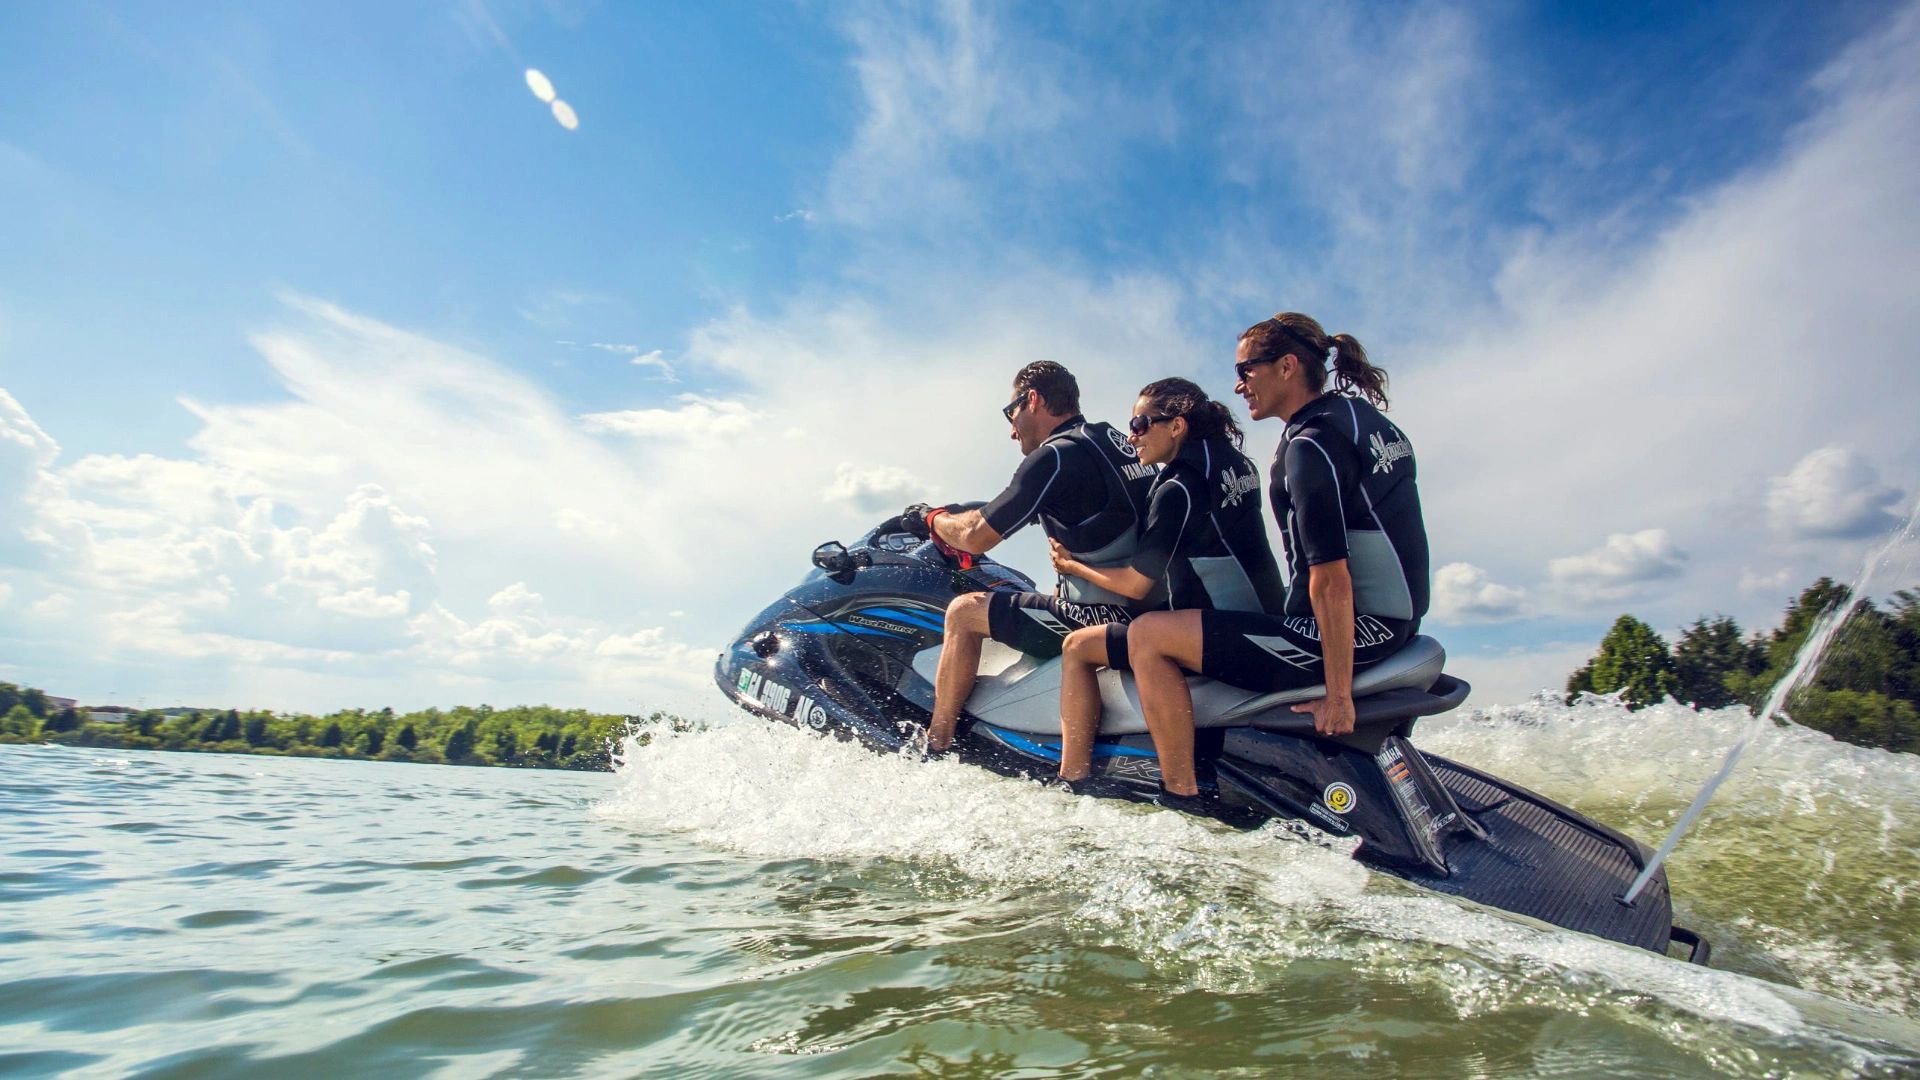 3 Facts You Need to Know About Jet Ski Rental on a Gulet! by  Chartered4_canada - Issuu